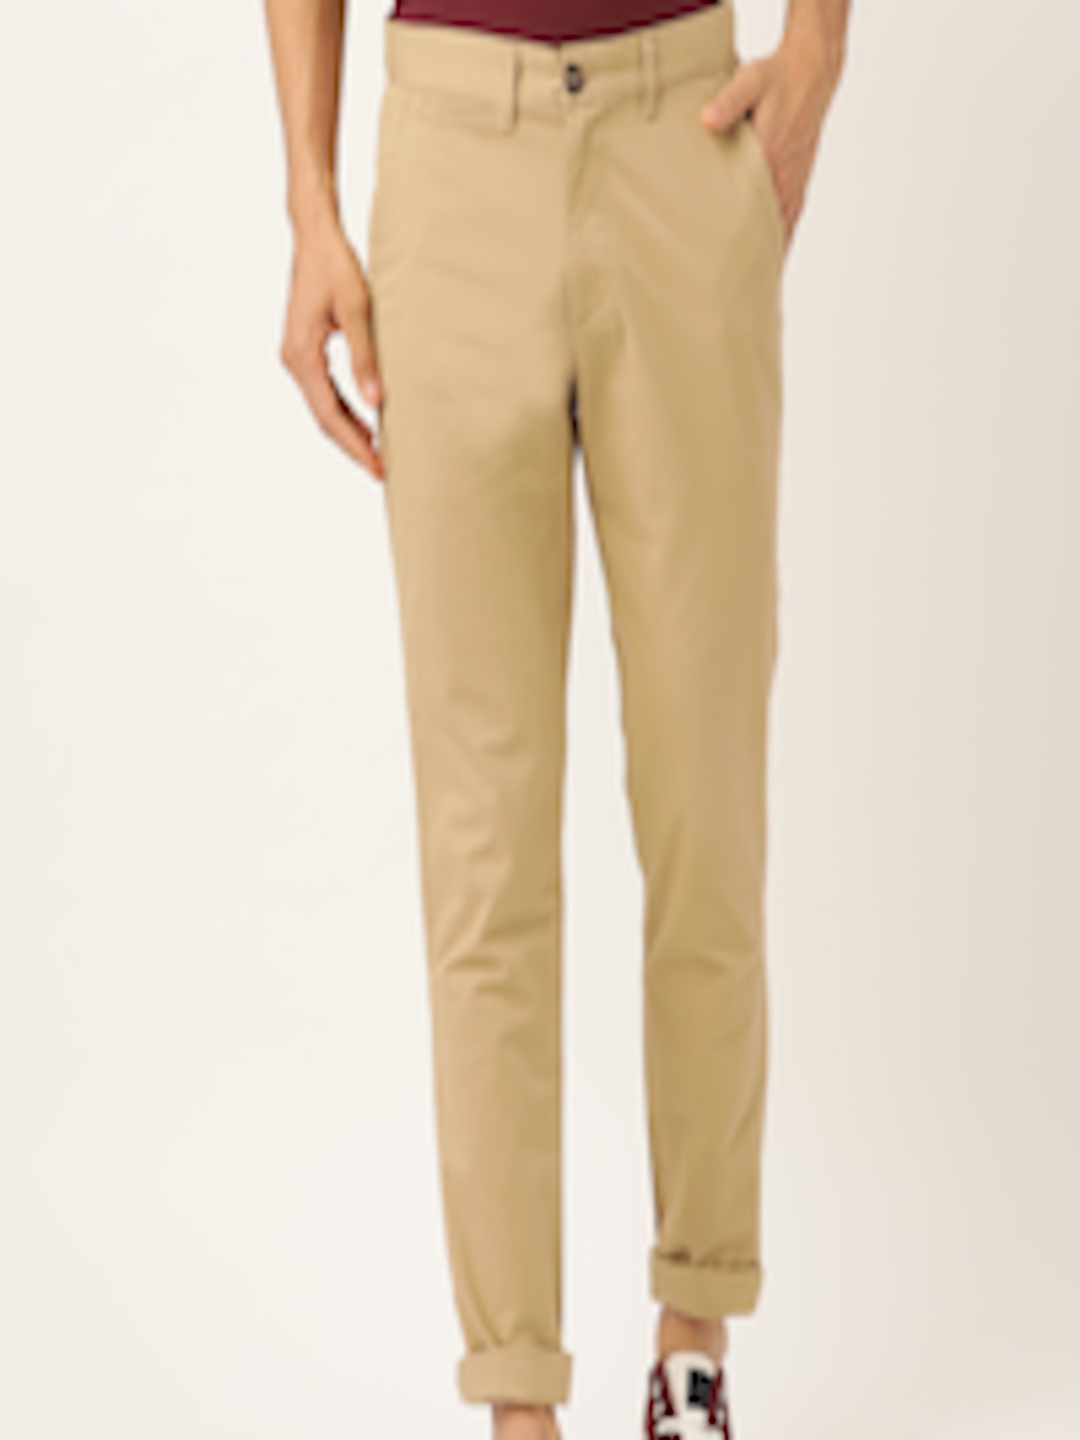 Buy United Colors Of Benetton Men Beige Slim Fit Solid Chinos ...